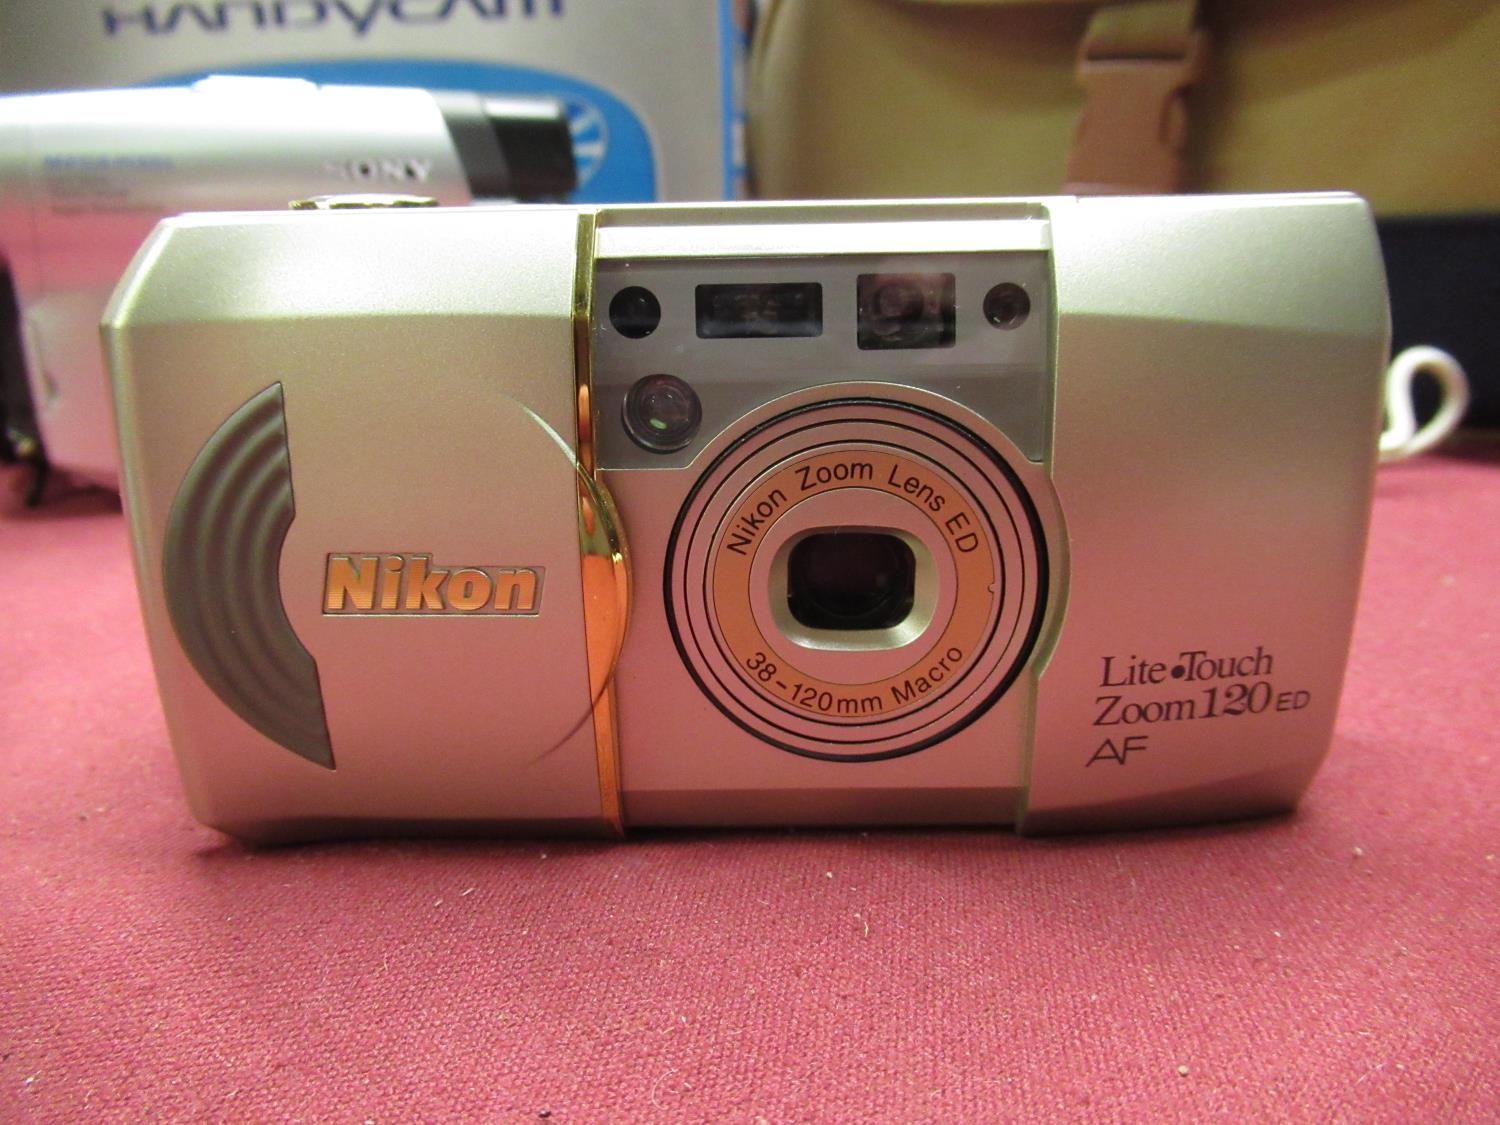 Sony DVD 201E DVD camcorder with box, charger, case etc, and a Nikon Lite Touch zoom 120 35mm camera